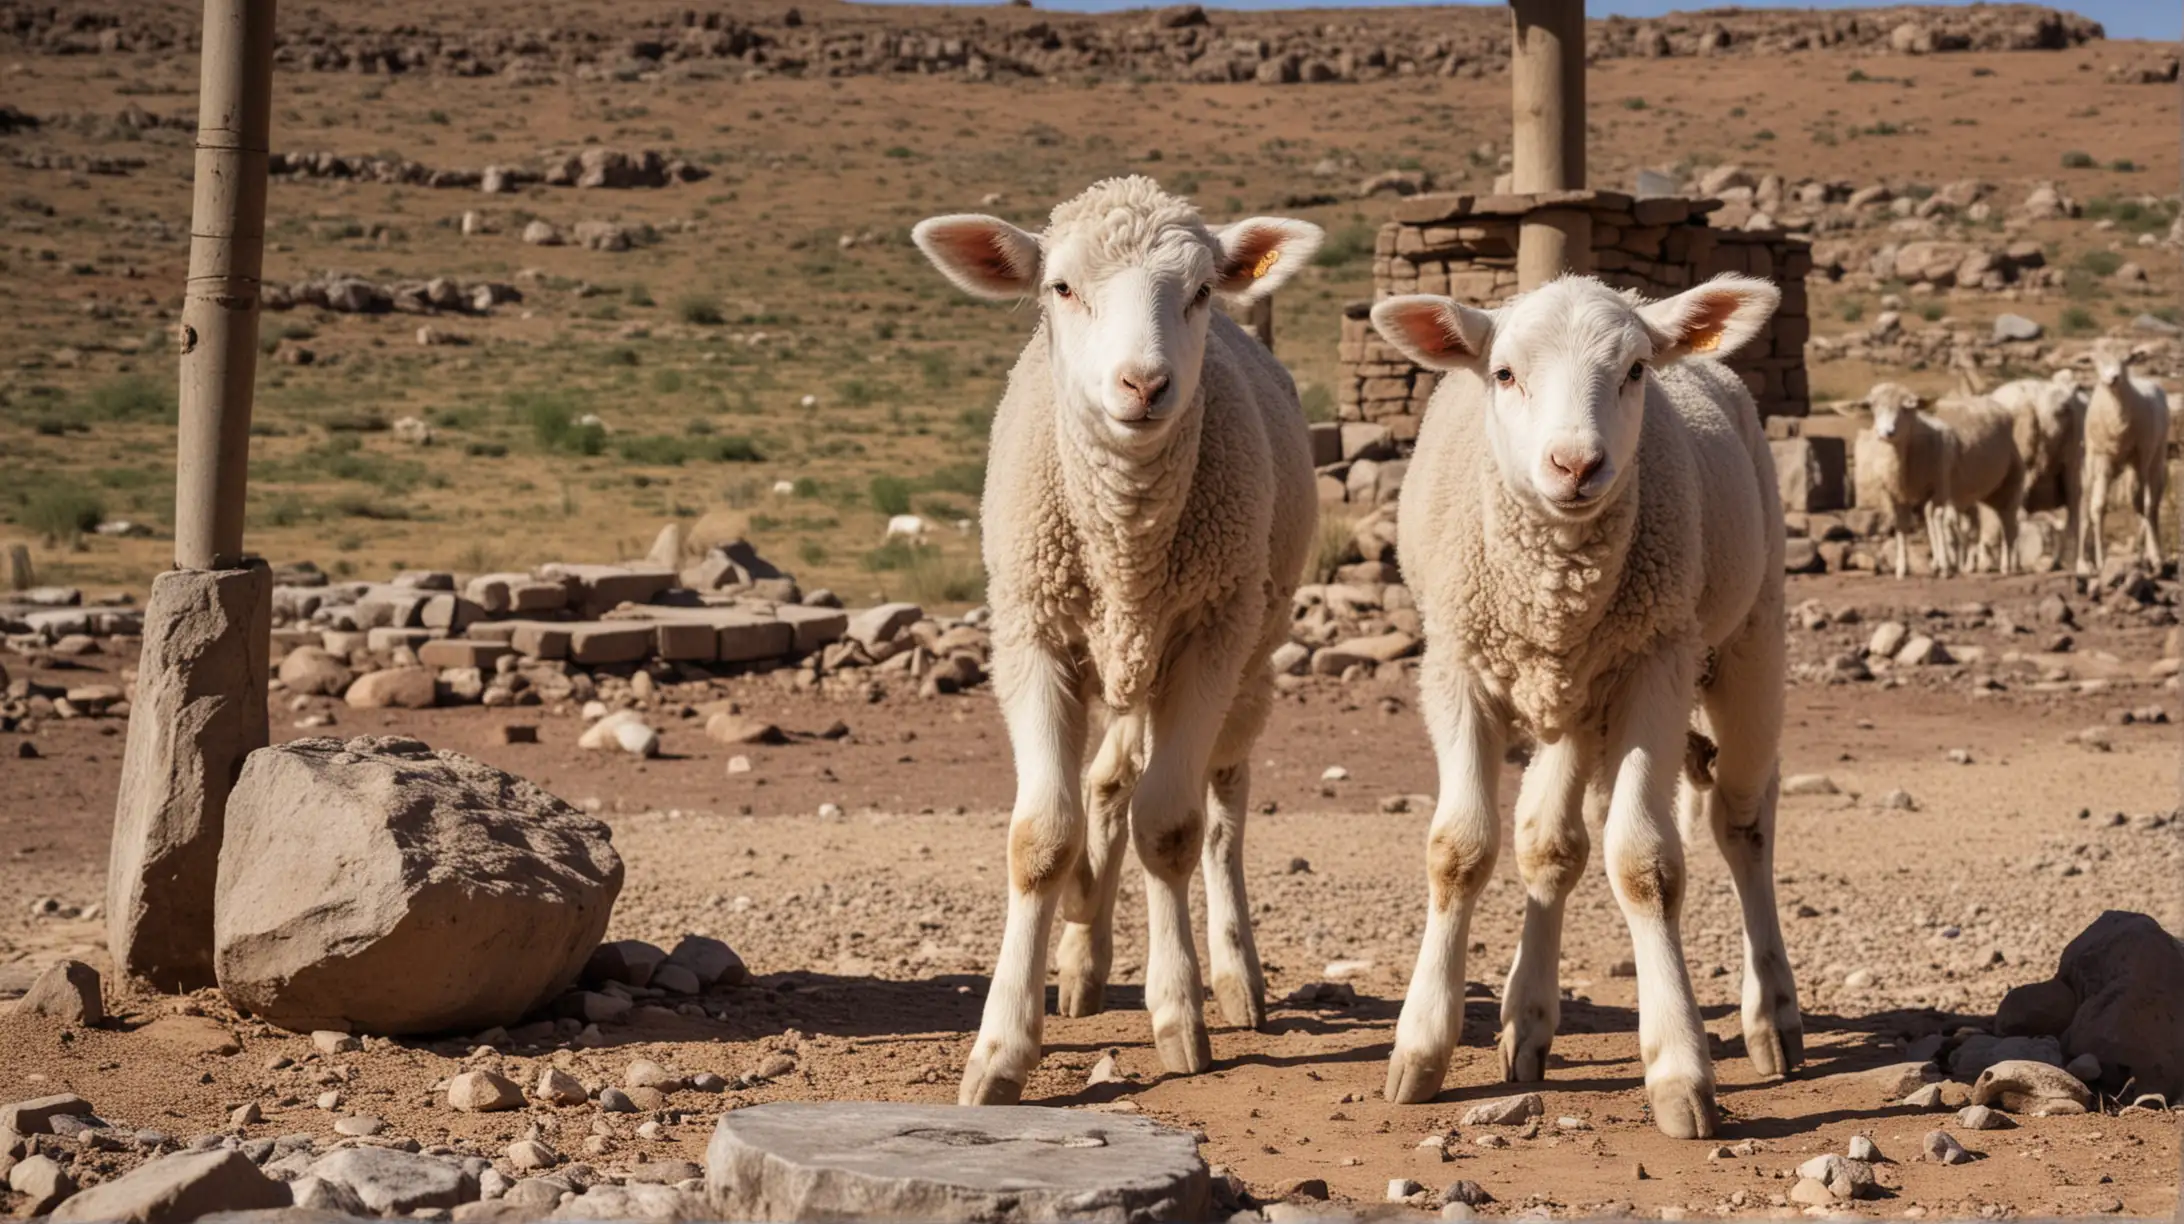 A close up of a calf and a lamb, in a desert location,  with a  stone sacrificial altar in the background.